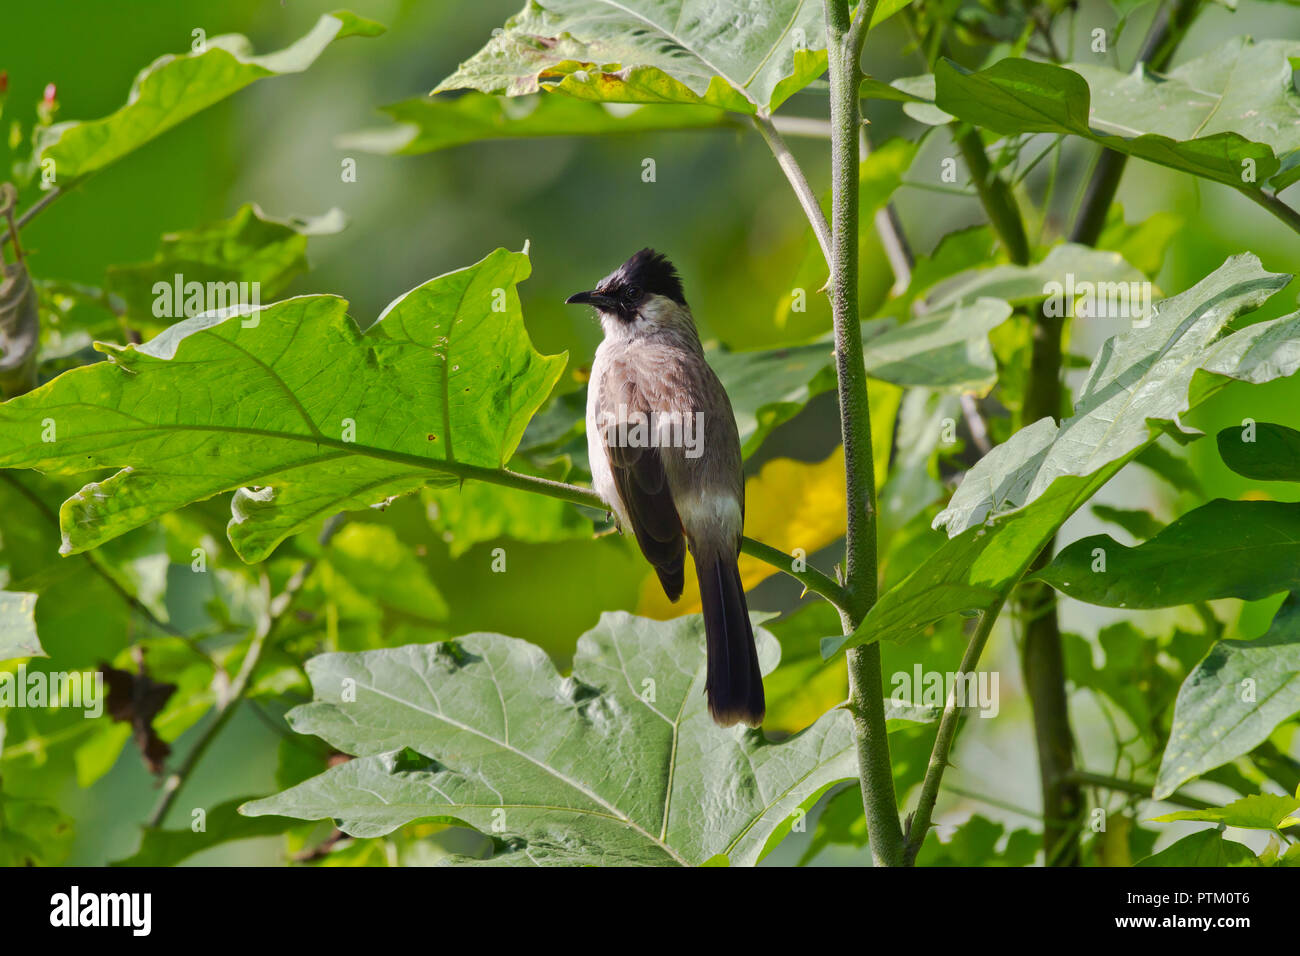 Sooty-headed bulbul (Pycnonotus aurigaster) sits in leaves, Chiang Dao, Thailand Stock Photo